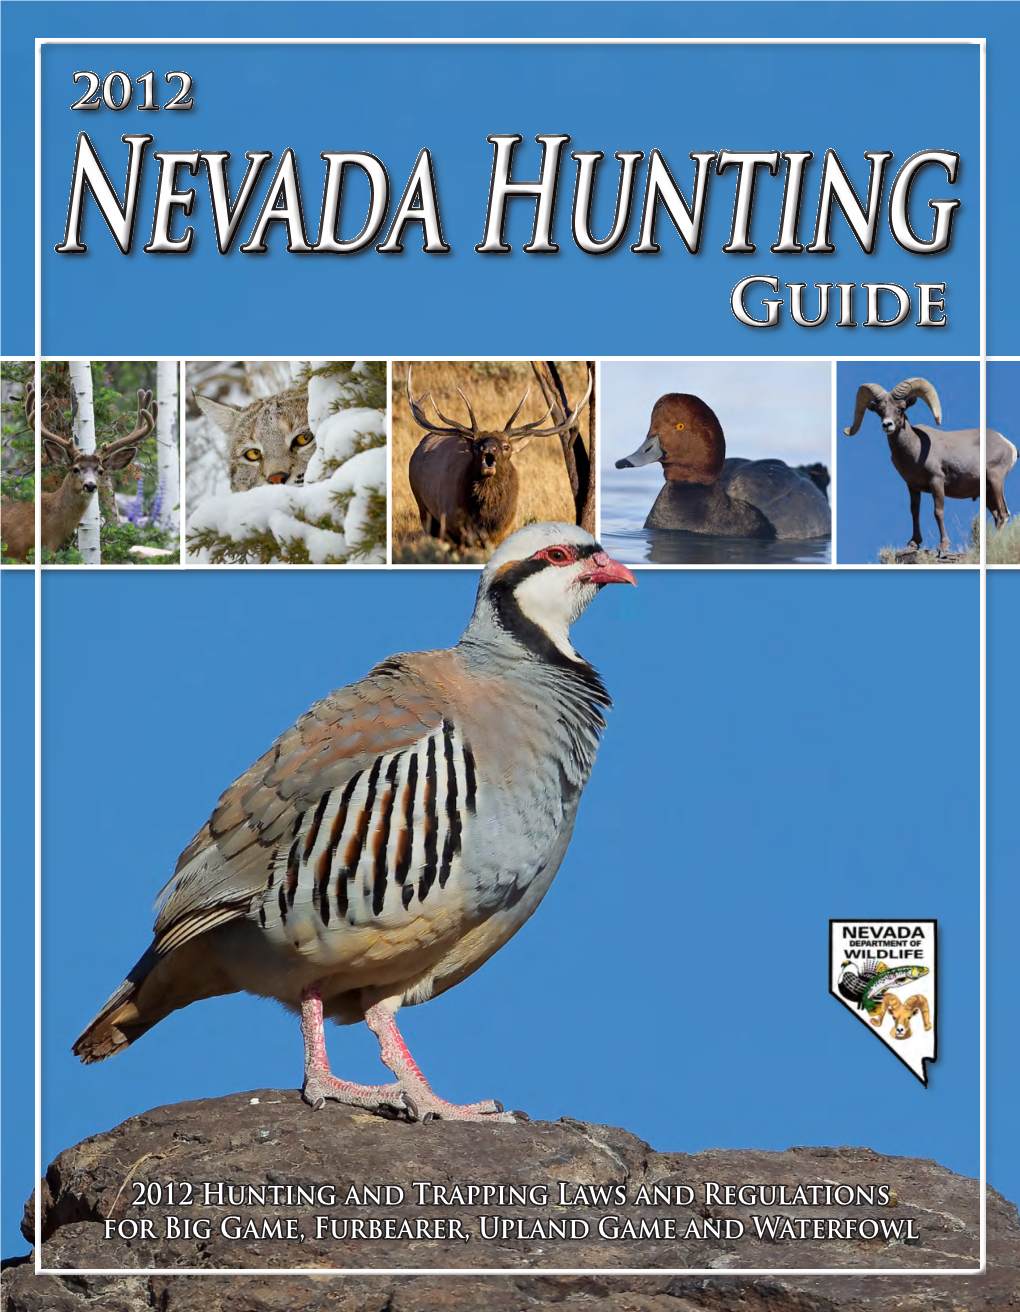 2012 Hunting and Trapping Laws and Regulations for Big Game, Furbearer, Upland Game and Waterfowl